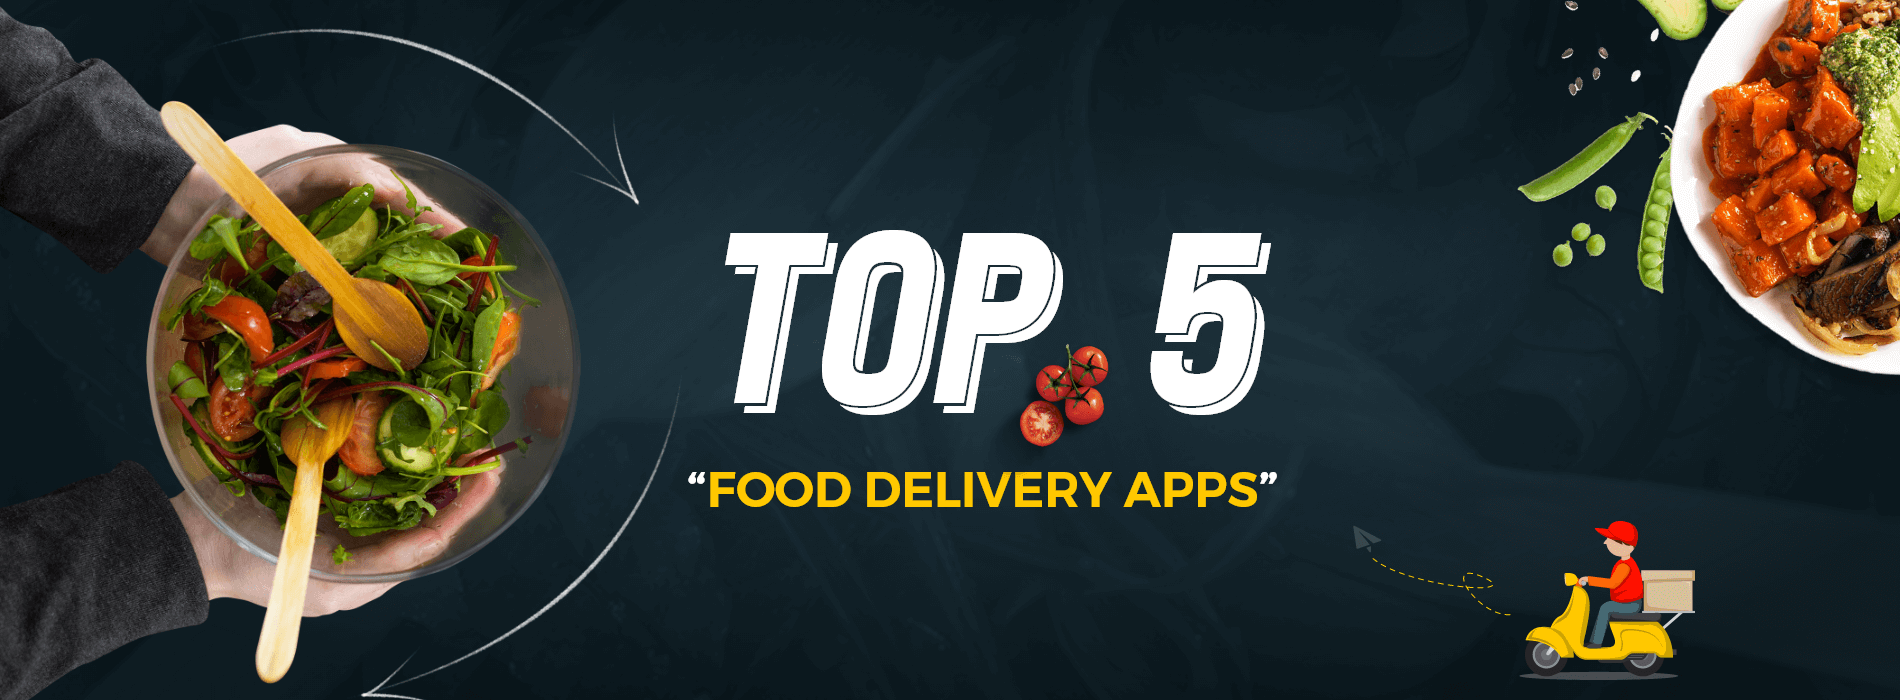 The 5 Best Food Delivery Apps And Reviews, So You Don’t Get Surprised Later